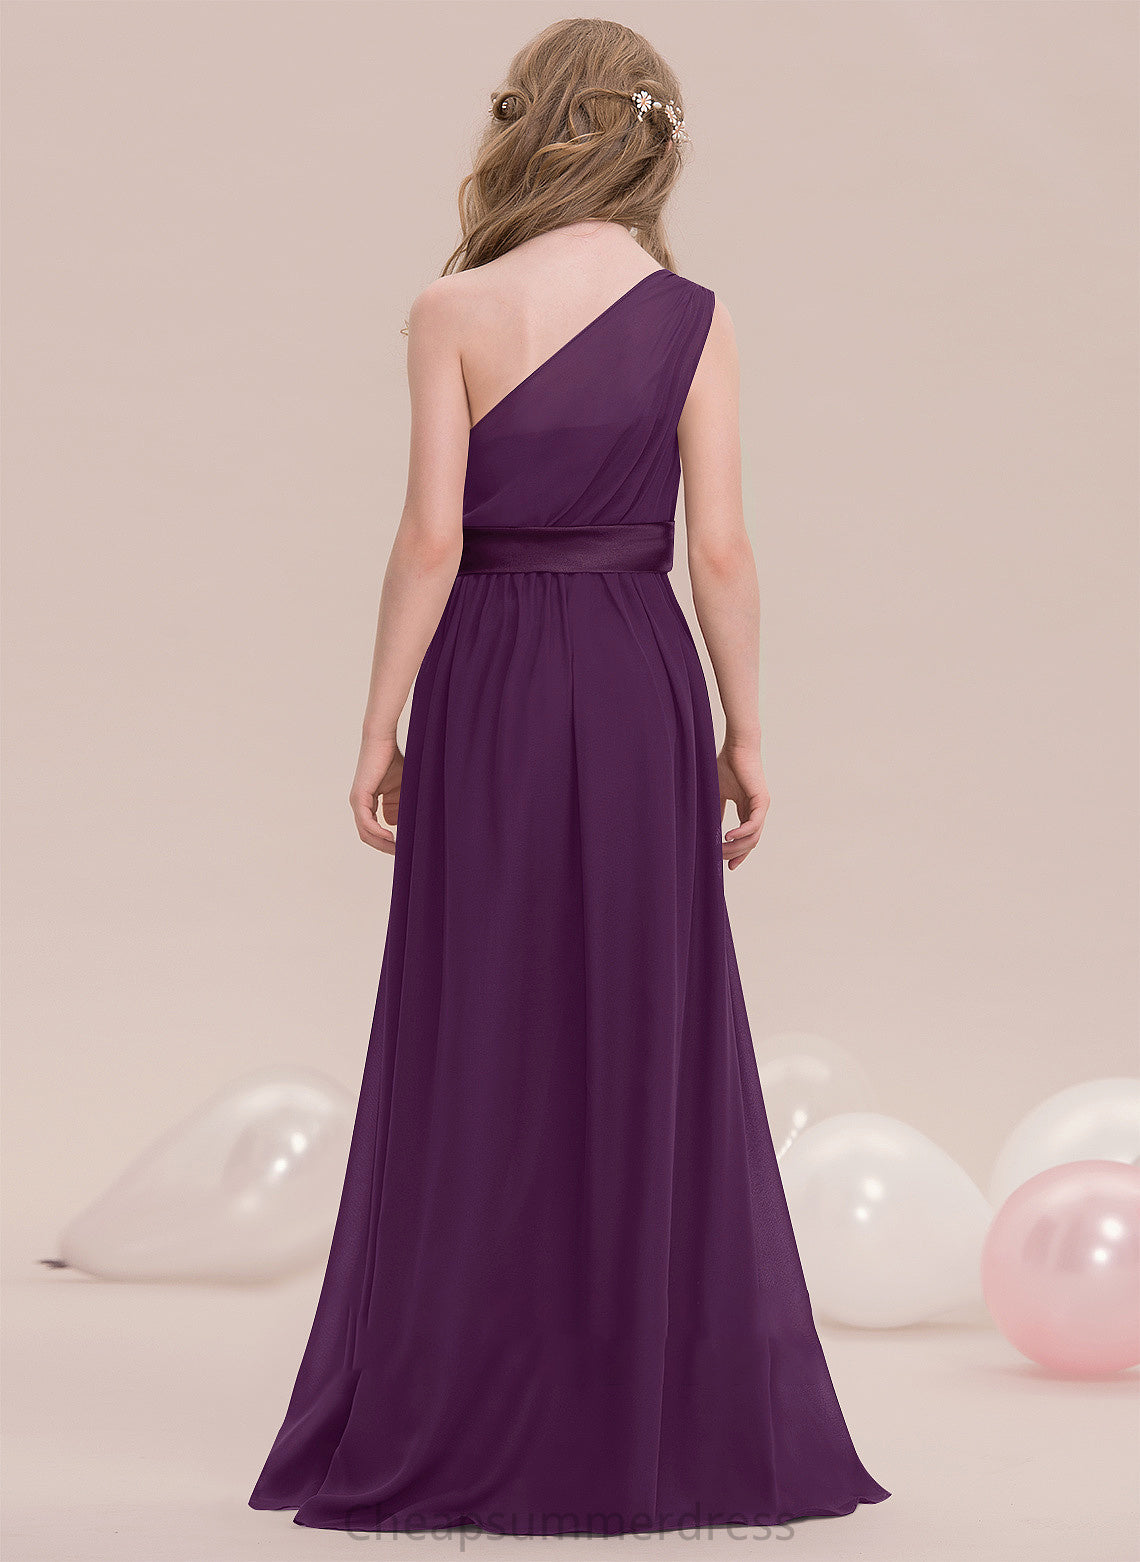 Adelyn Floor-Length One-Shoulder A-Line Ruffle Junior Bridesmaid Dresses With Chiffon